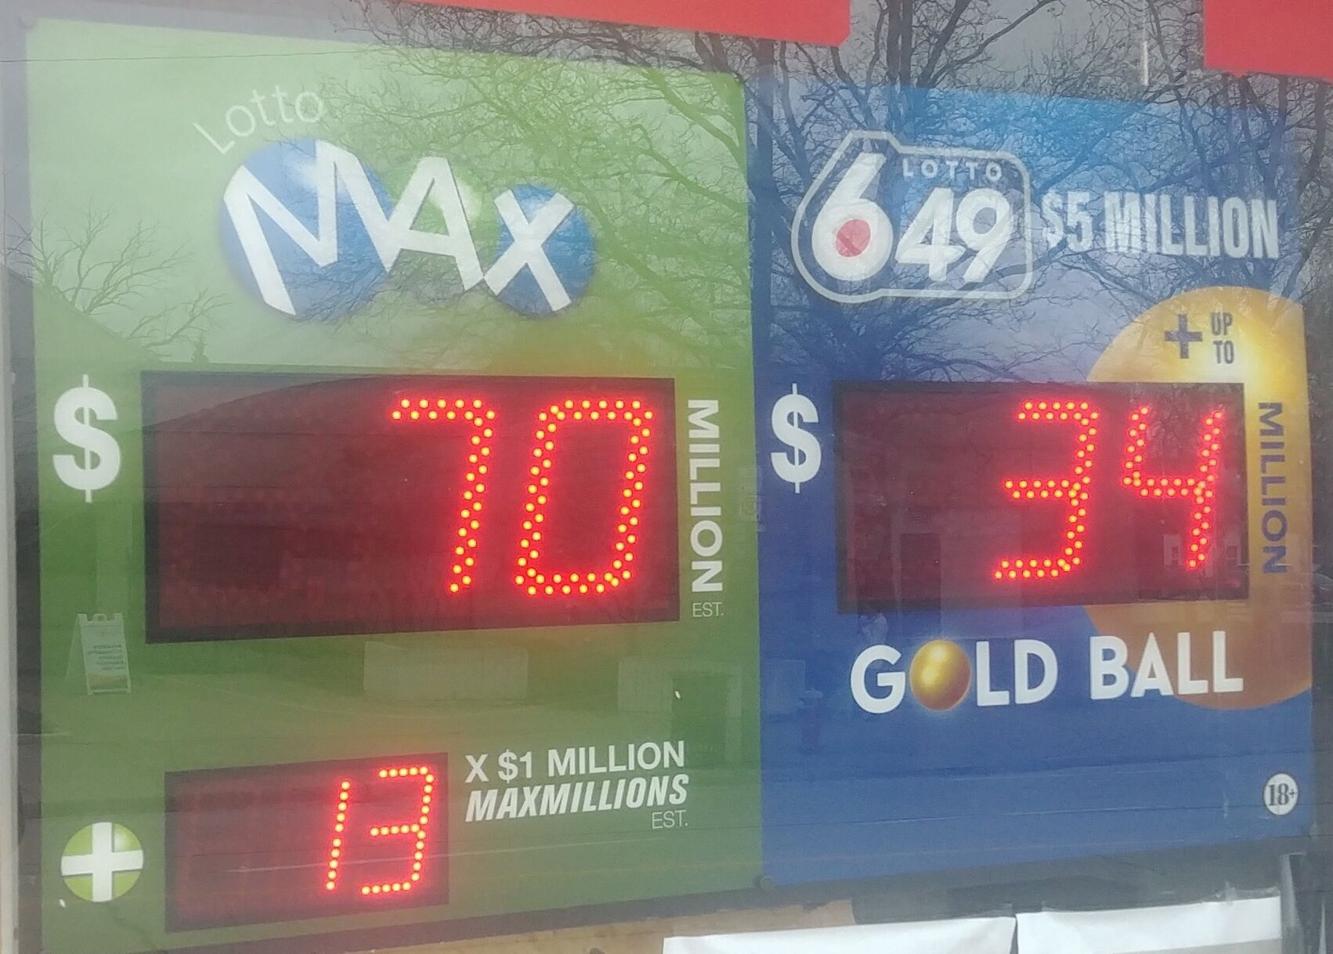 Over 100M still available between Lotto Max and Lotto 649